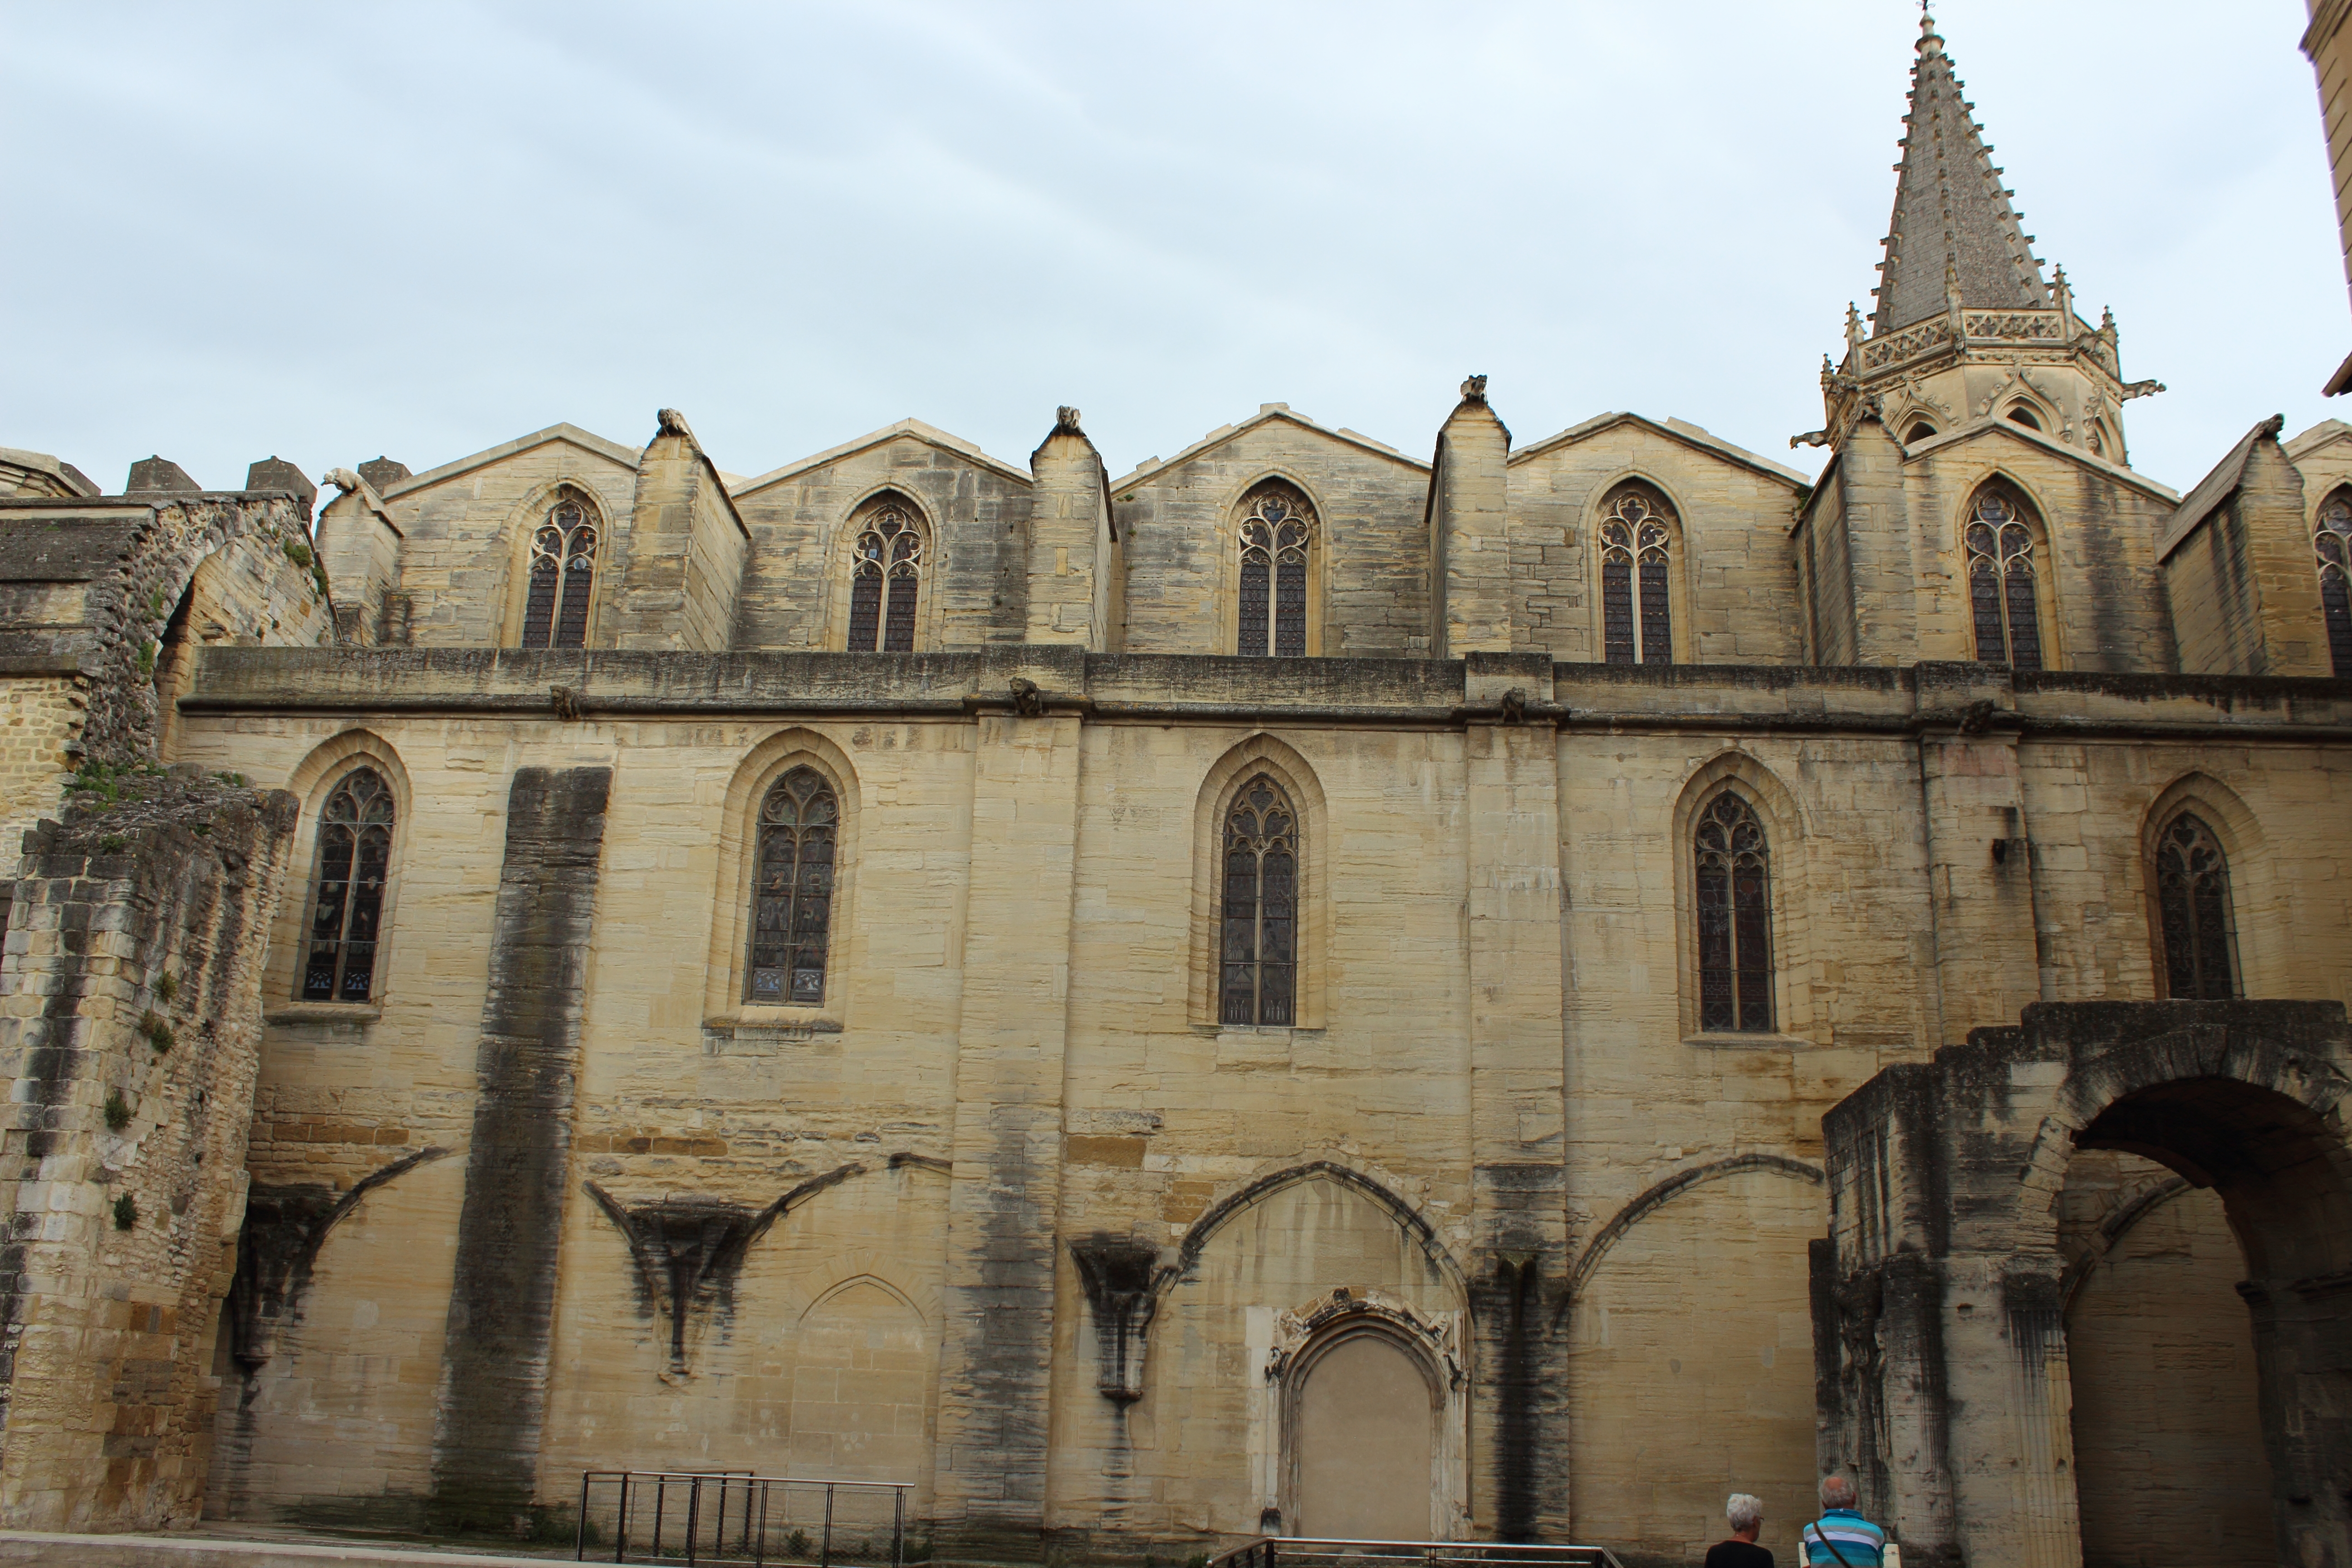 Visiting Provence: Carpentras, blog post by Aspasia S. Bissas, provence, france, carpentras, vaucluse, architecture, travel, travelling, french tourism, avignon, whimsy bower, history, photography, aspasiasbissas.com